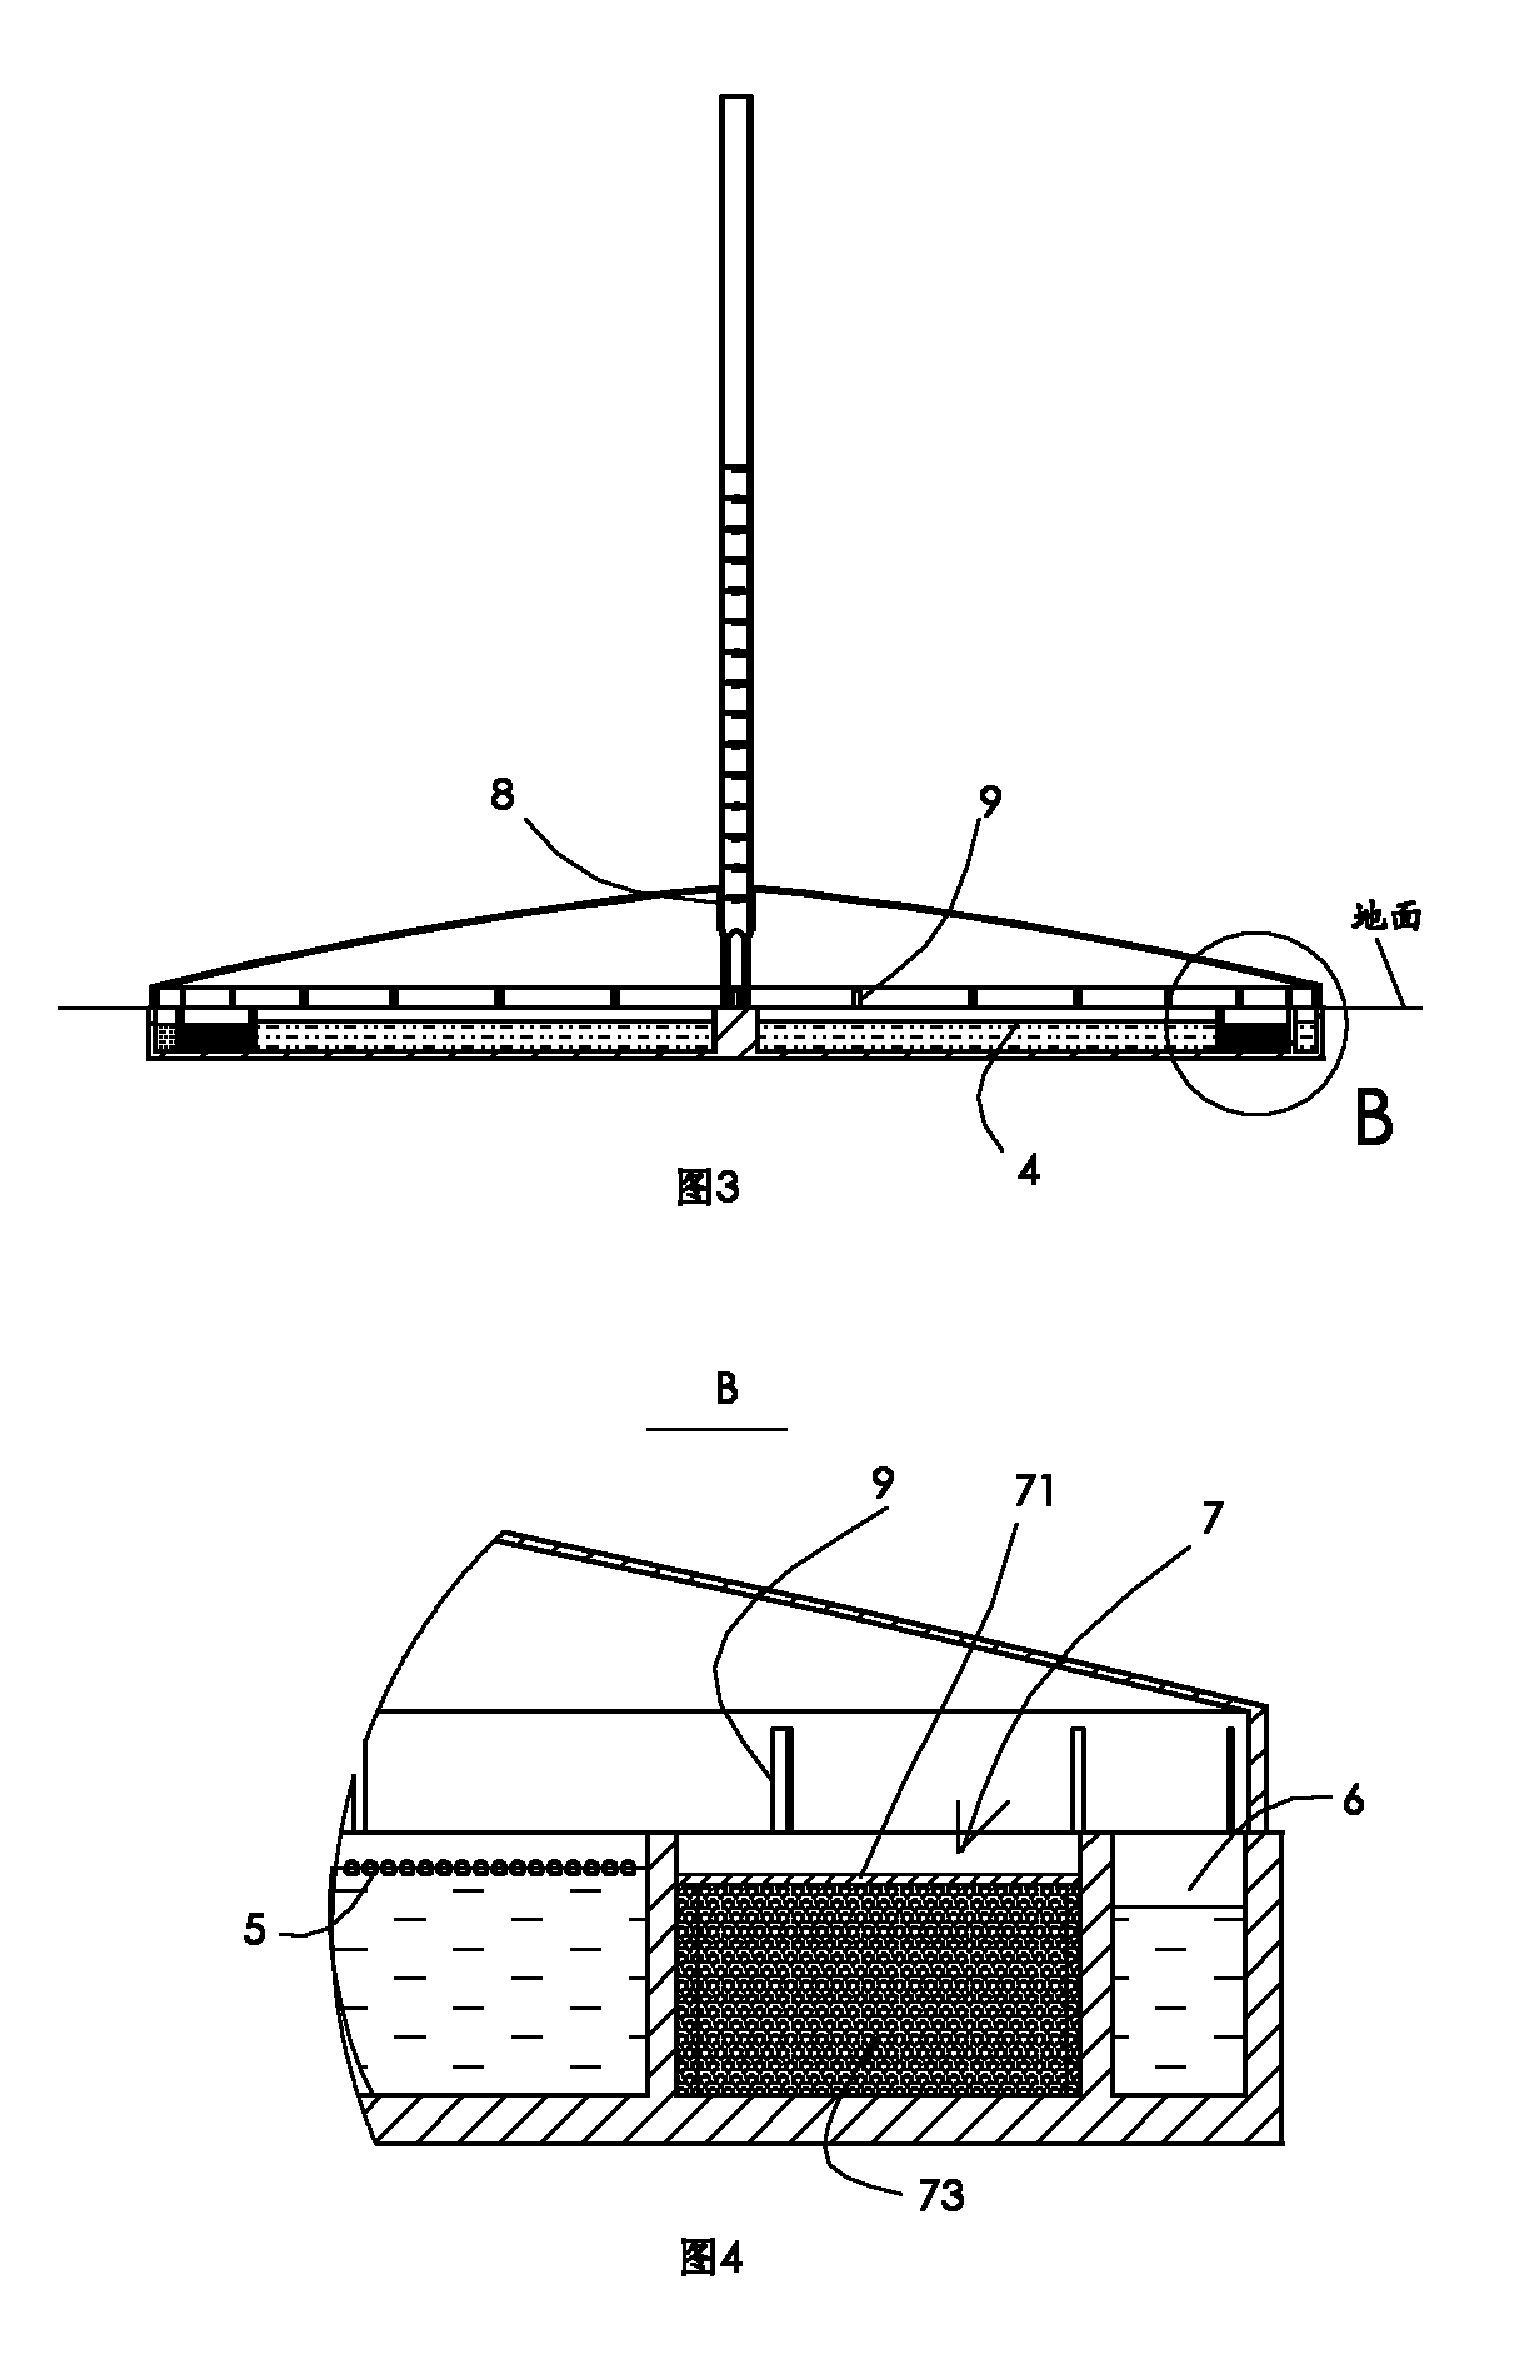 Method for sunning slat and generating power by using solar energy and wind energy